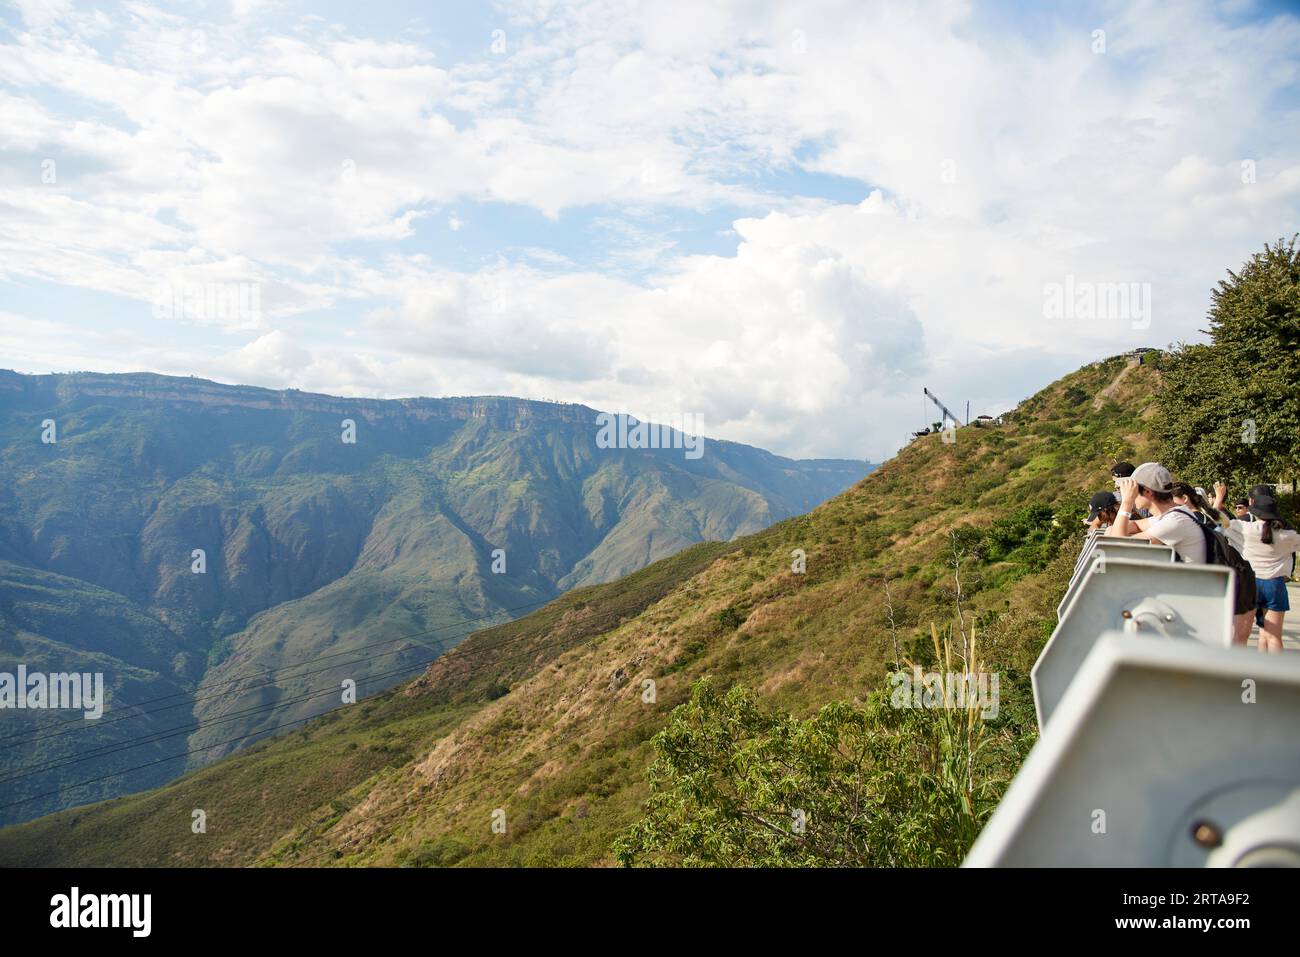 Aratoca, Santander, Colombia, Nov 23, 2022: People admiring the mountain scenery at a viewpoint in the Chicamocha National Park, Panachi, a popular to Stock Photo